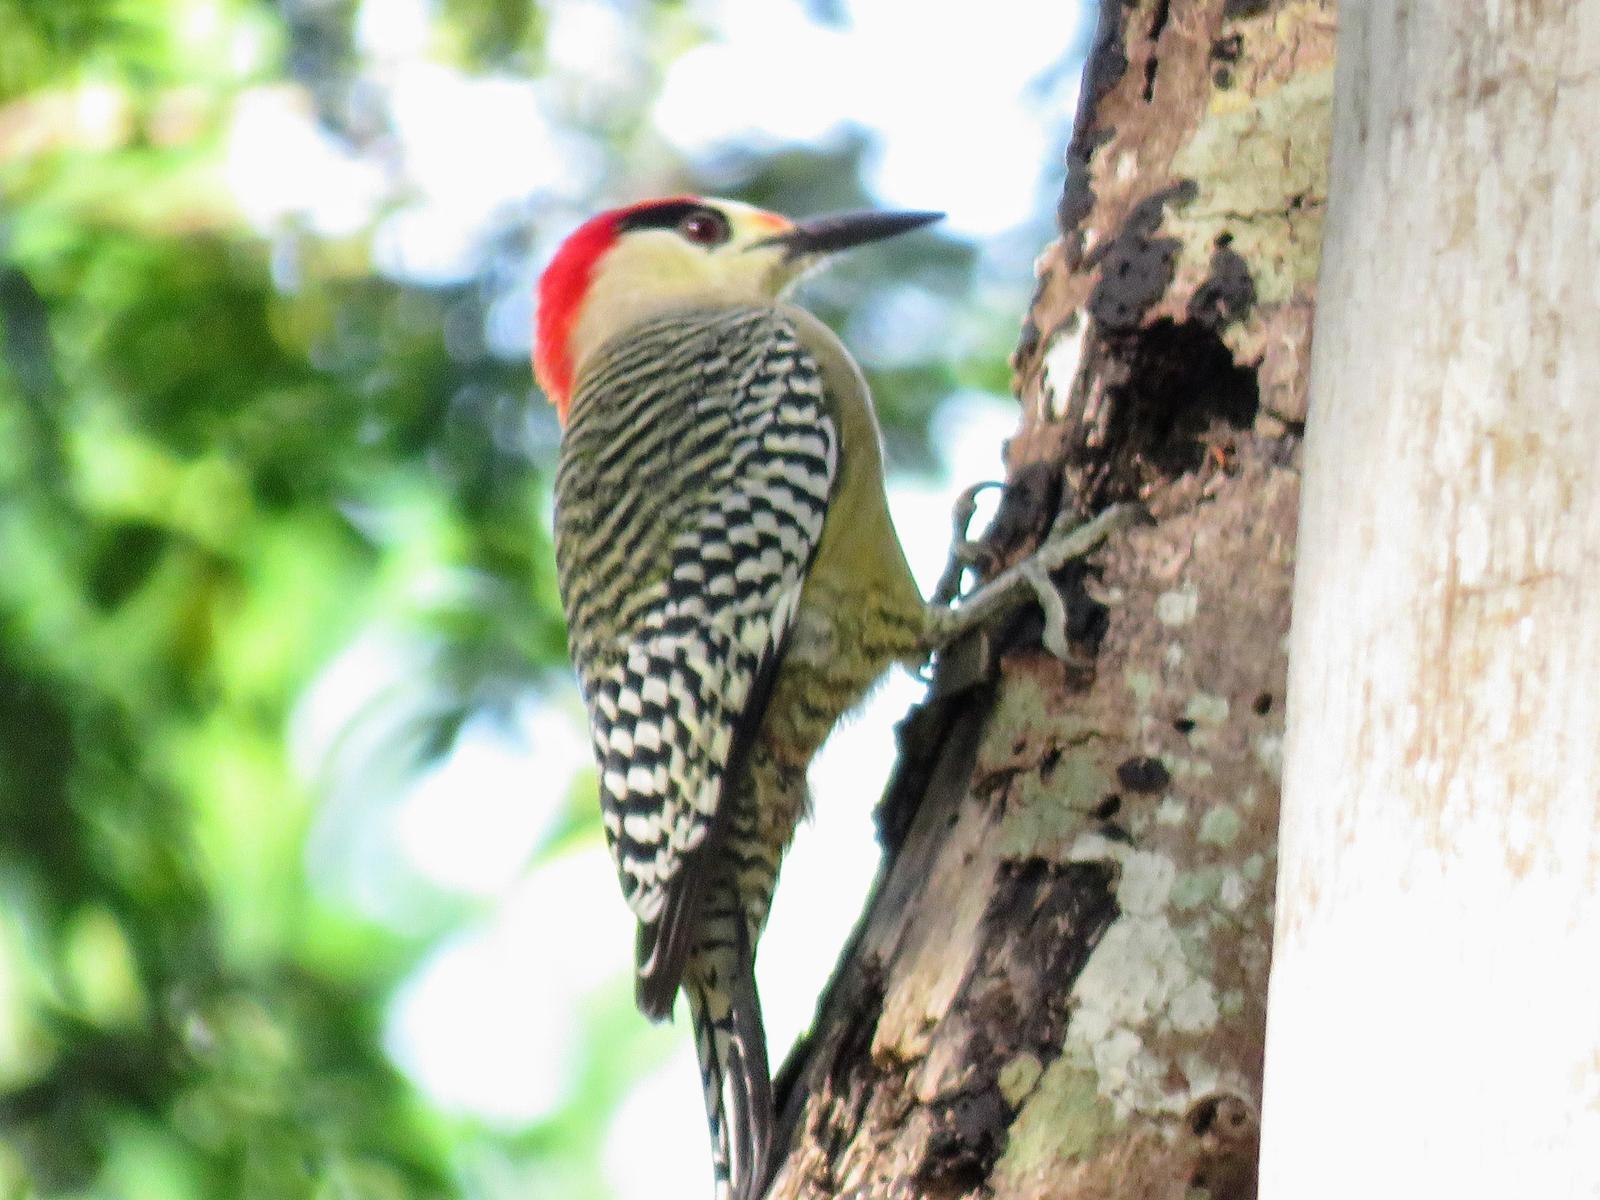 West Indian Woodpecker Photo by Carey Parks